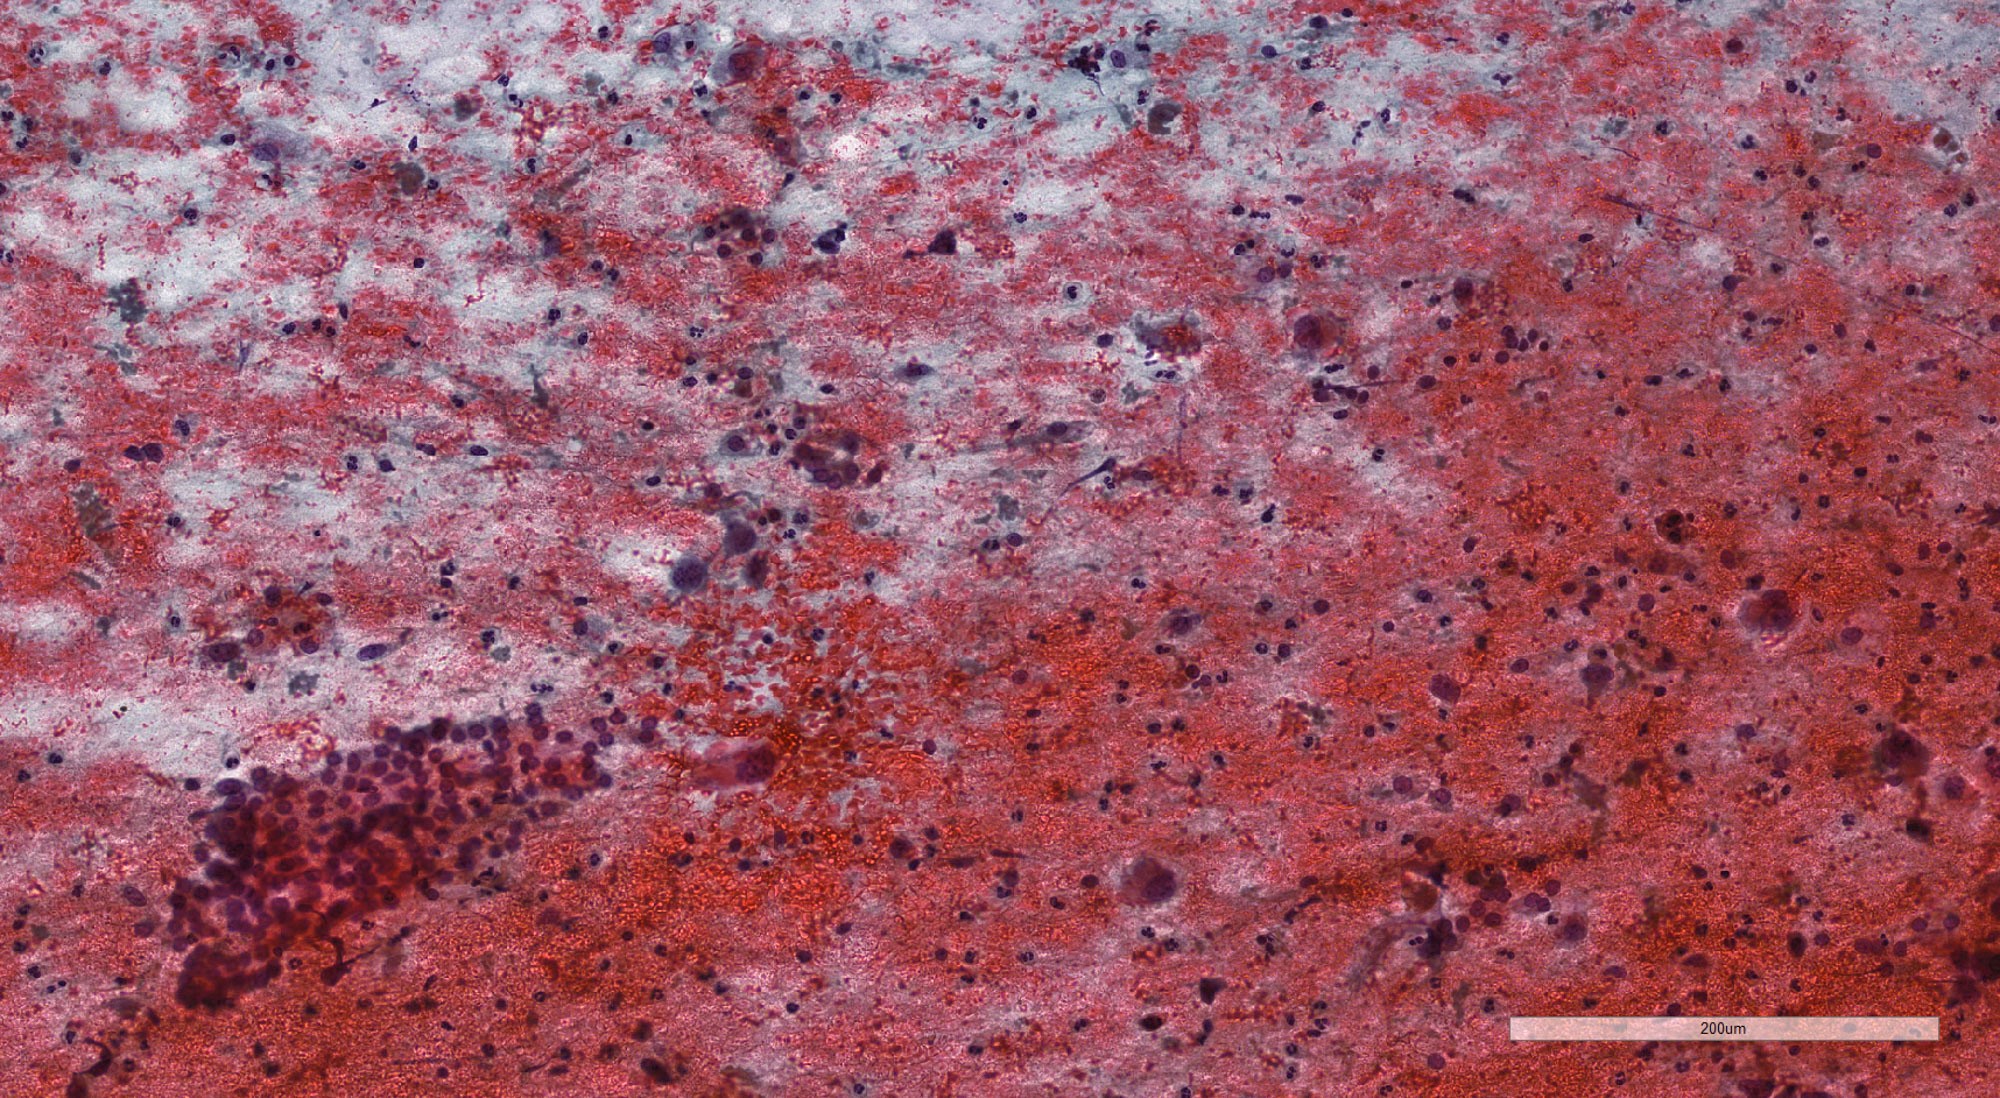 Differentiated thyroid carcinoma component